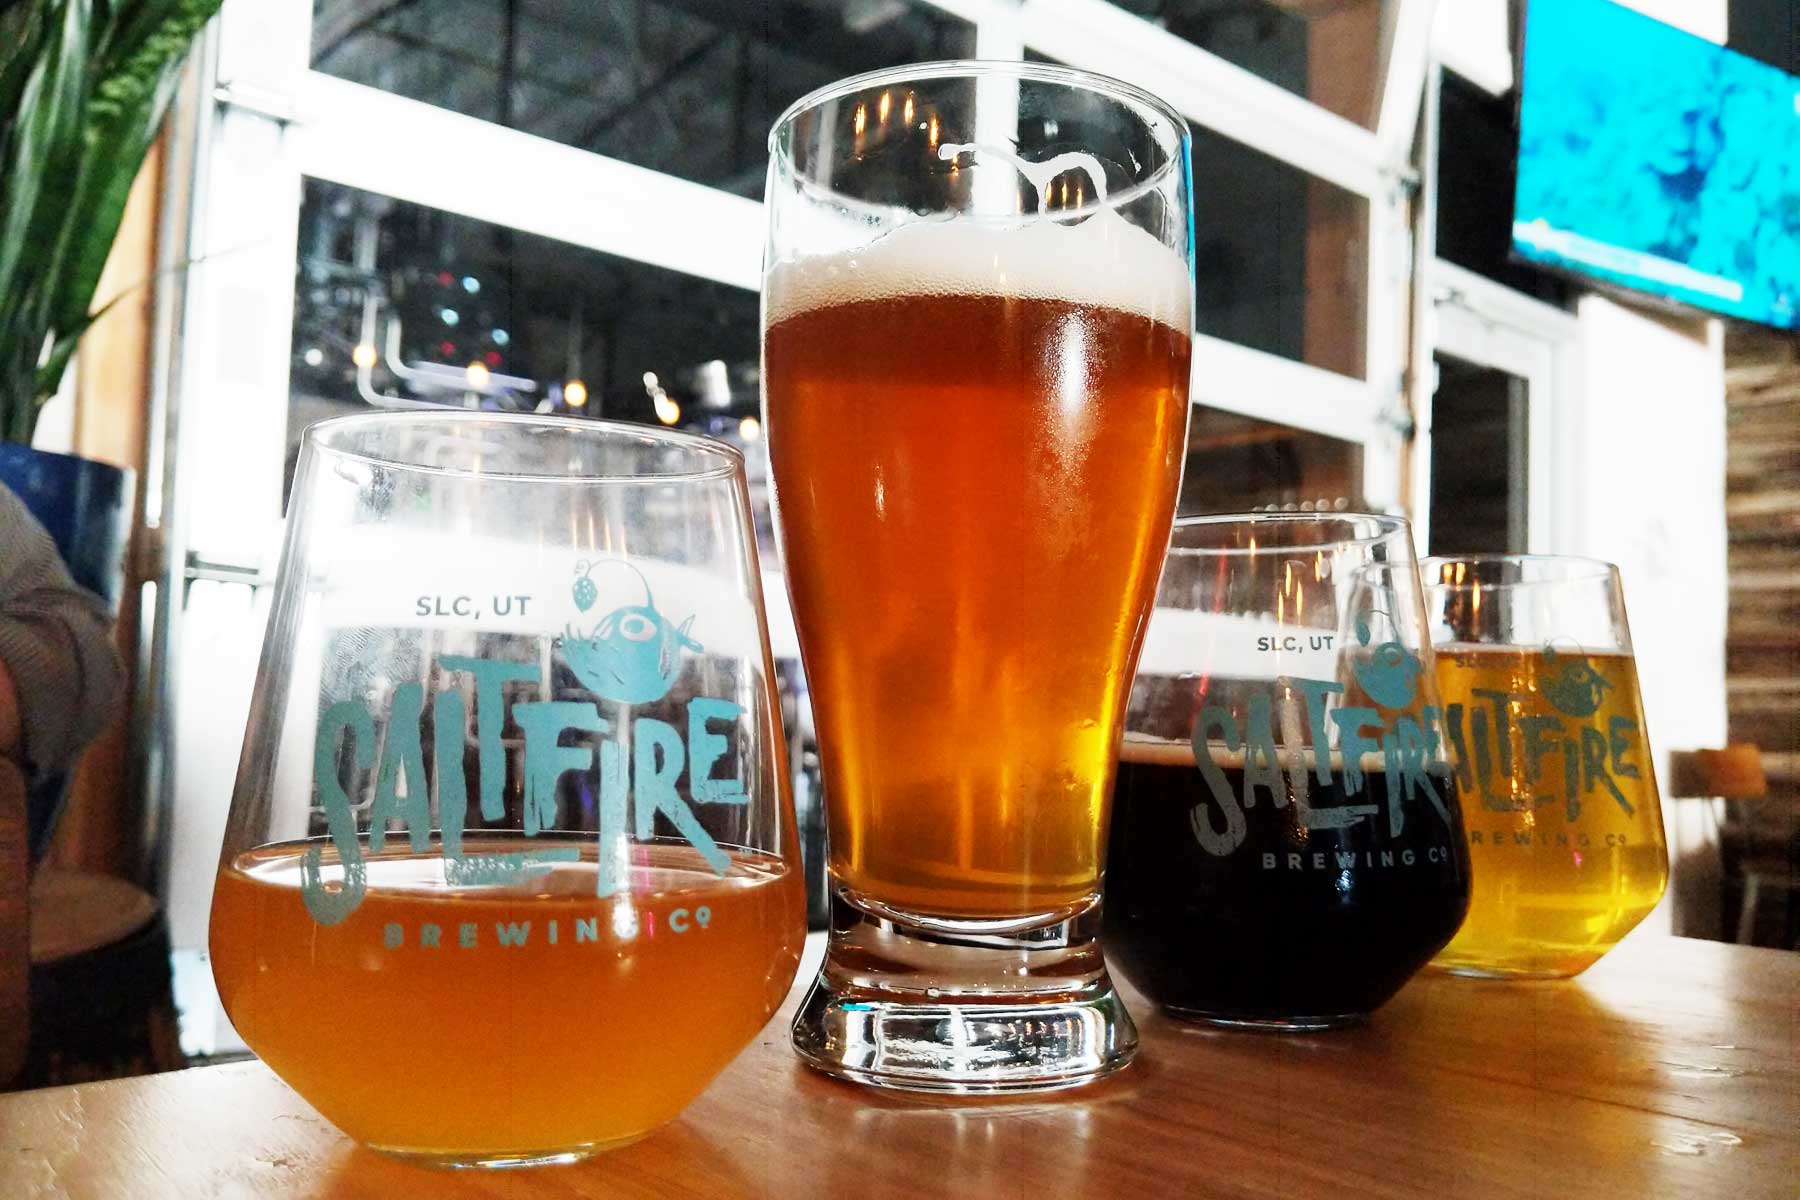 A variety of beers from Saltfire Brewing Company.